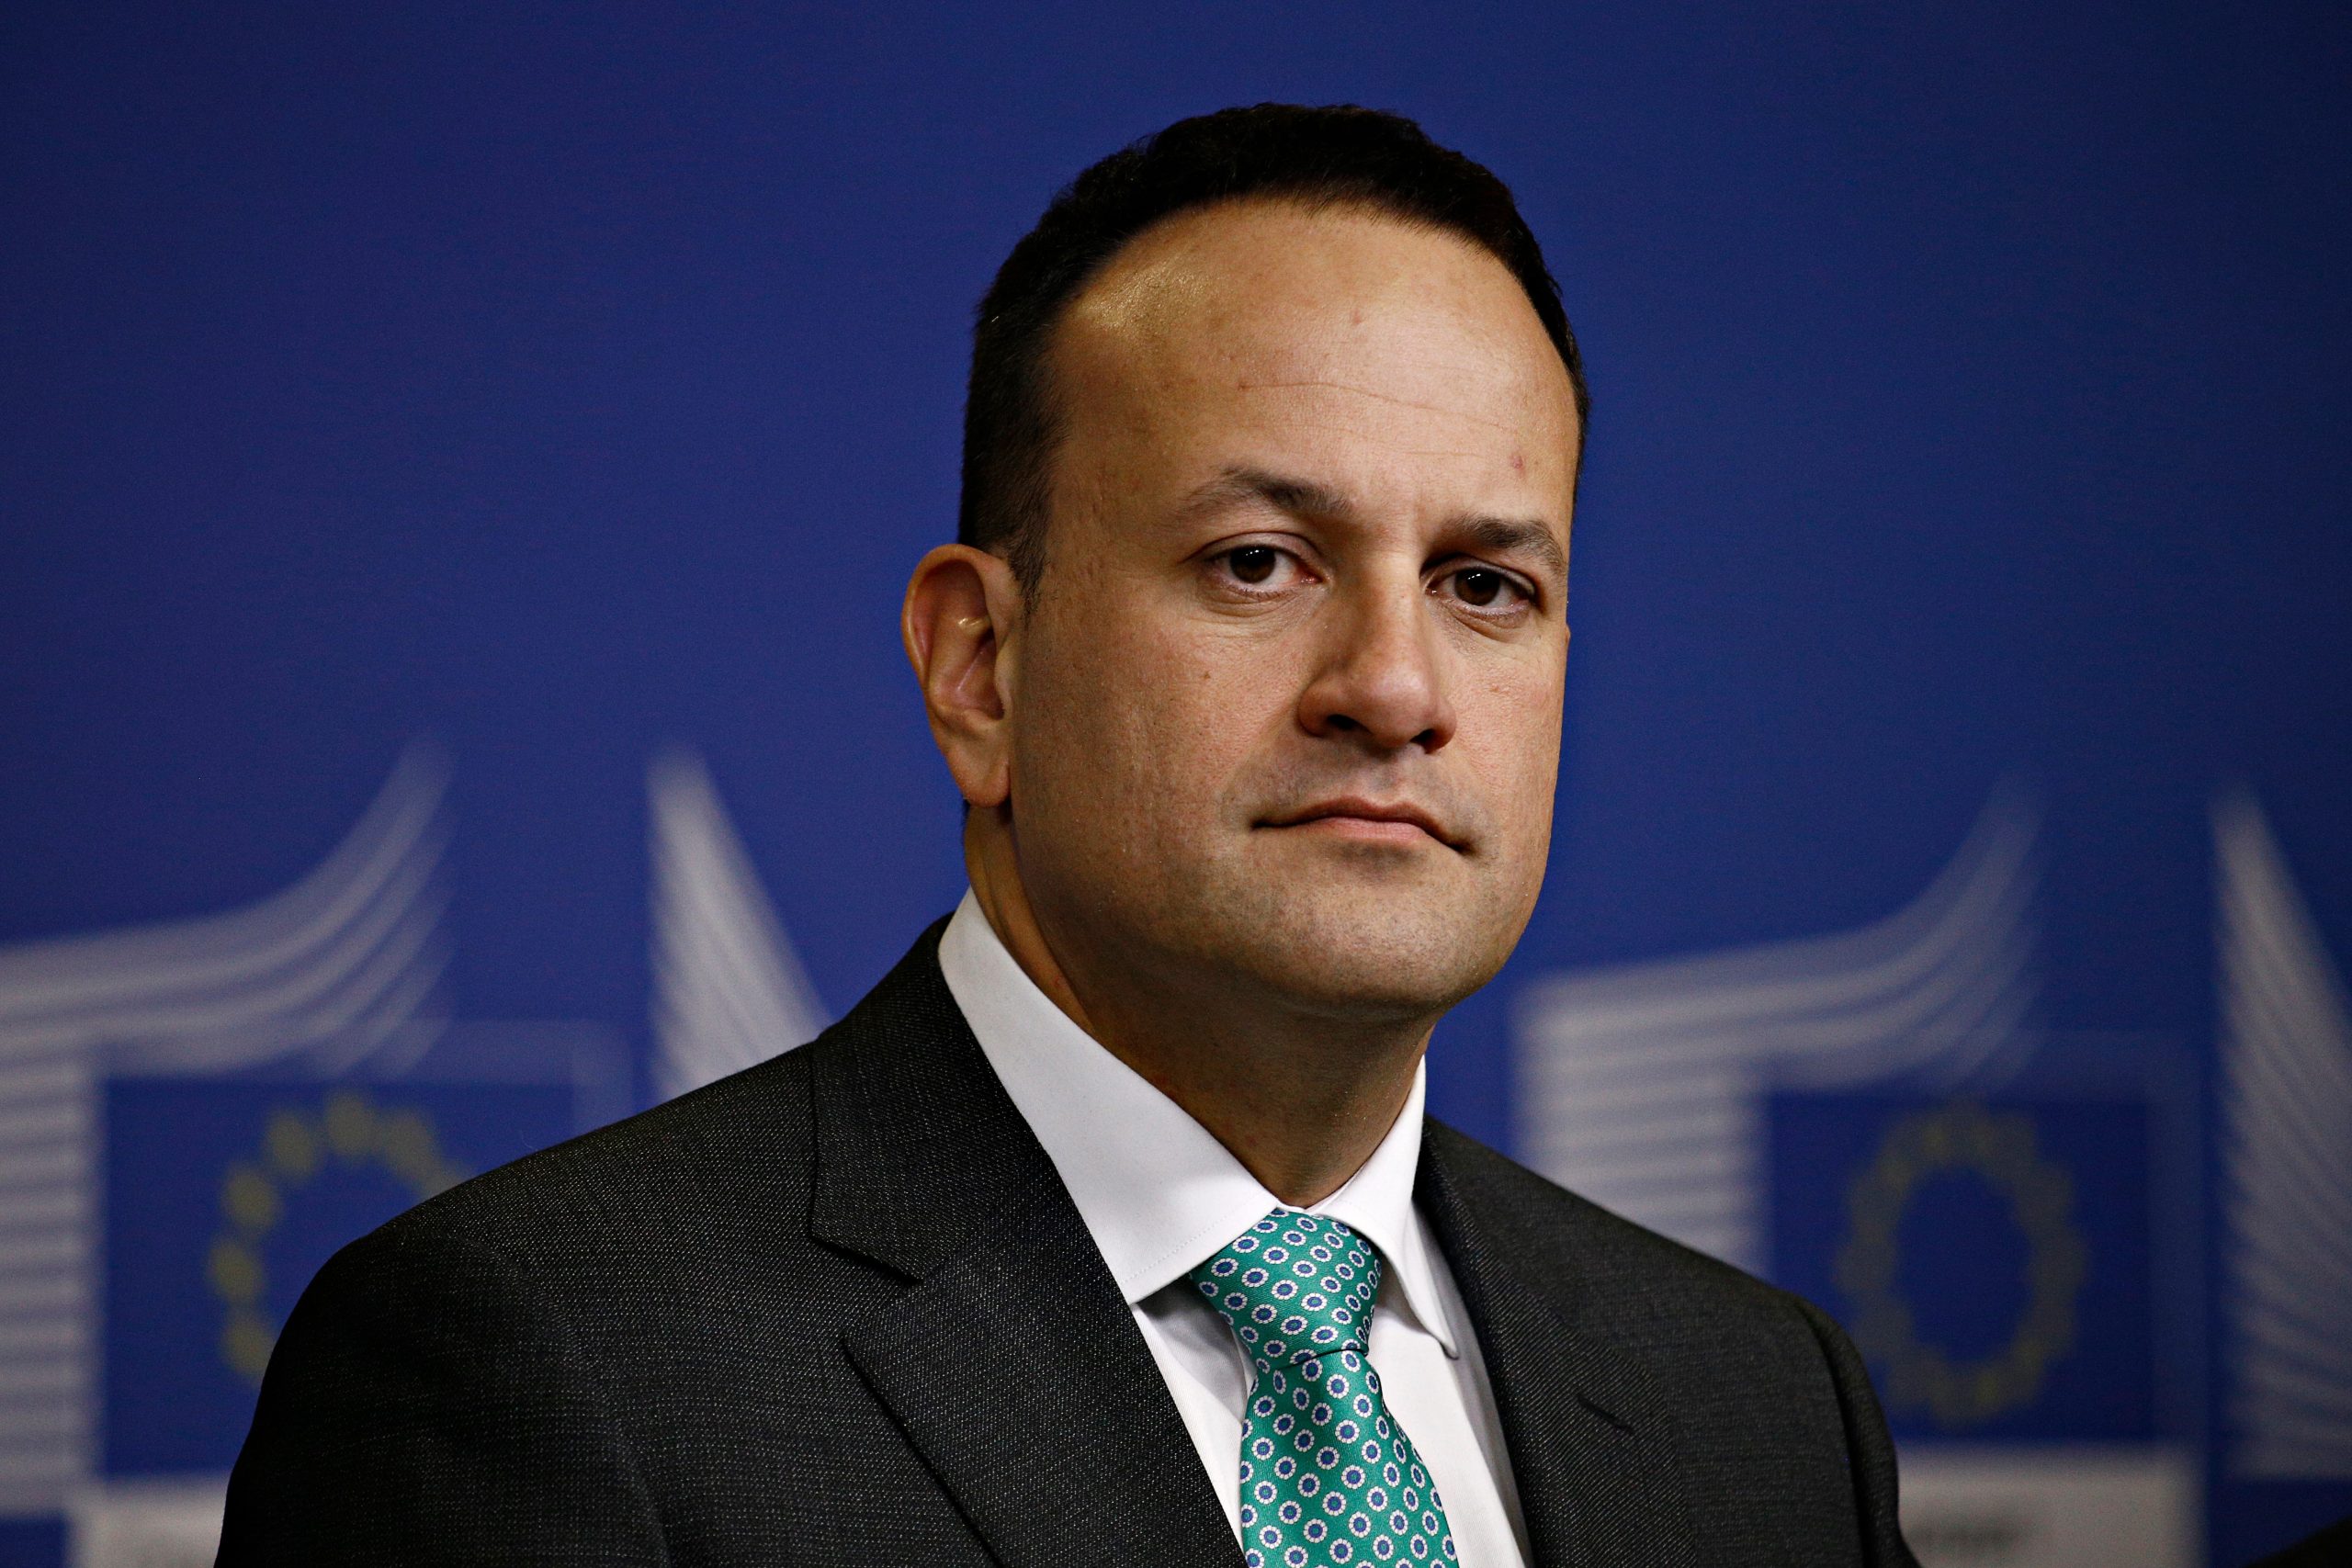 Meet with retail employers to understand our concerns about costs: RGDATA challenges Taoiseach